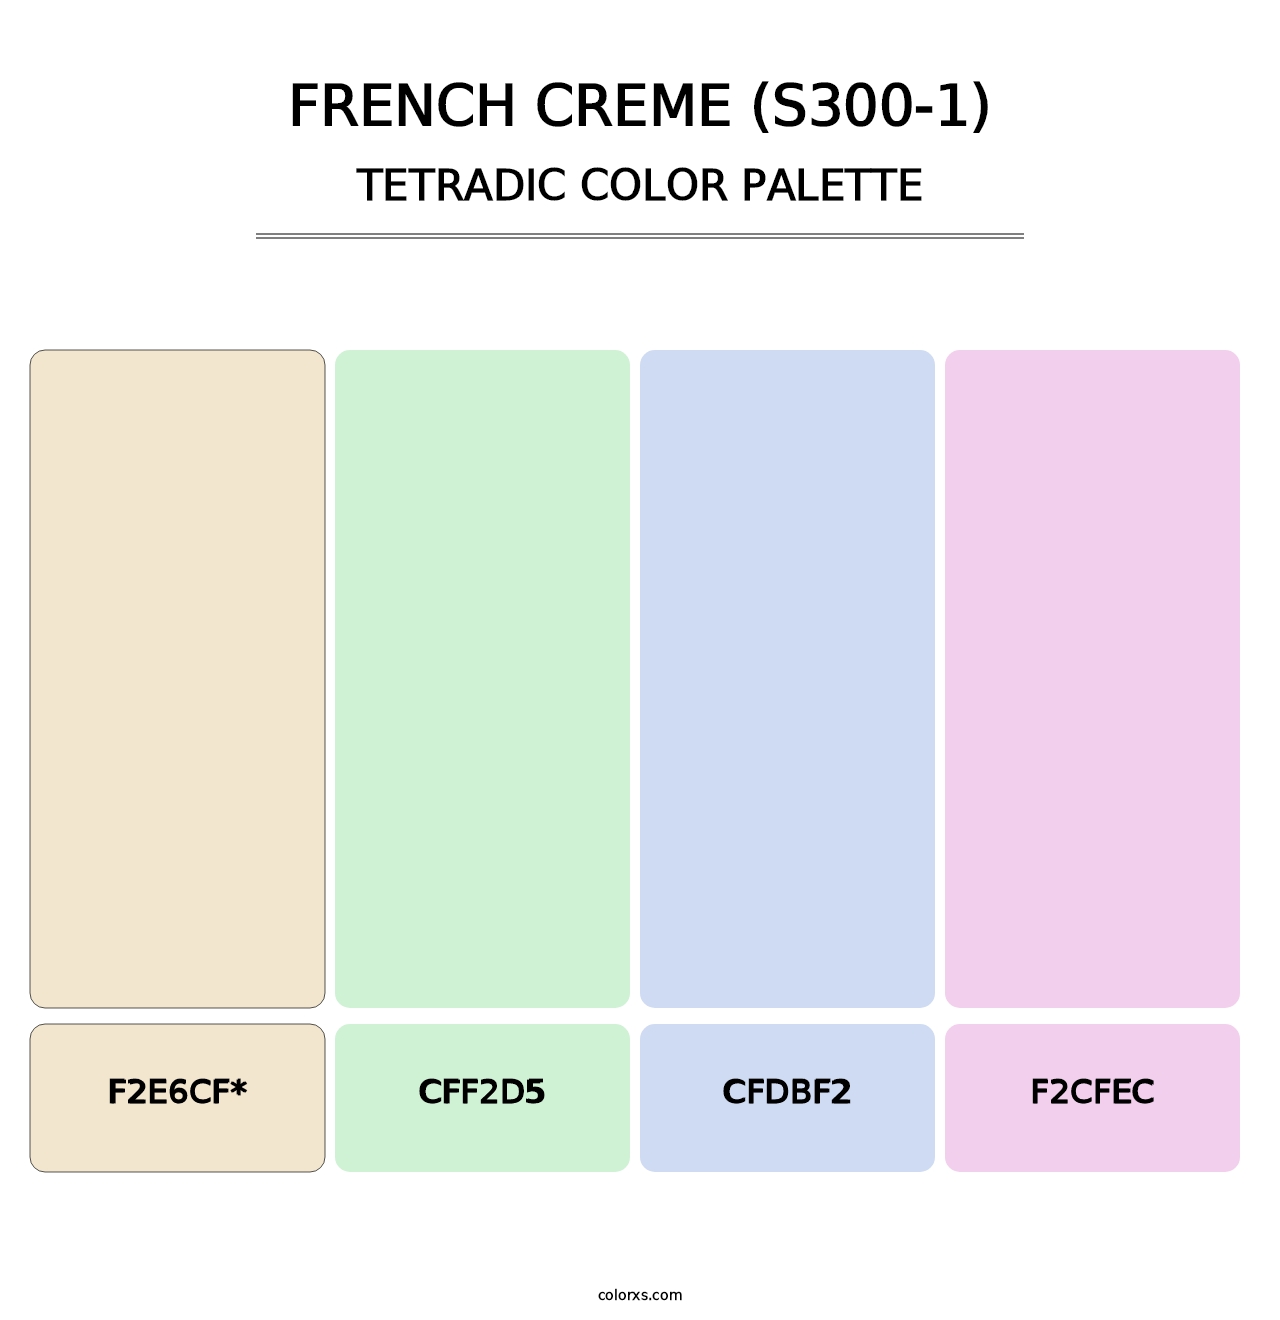 French Creme (S300-1) - Tetradic Color Palette